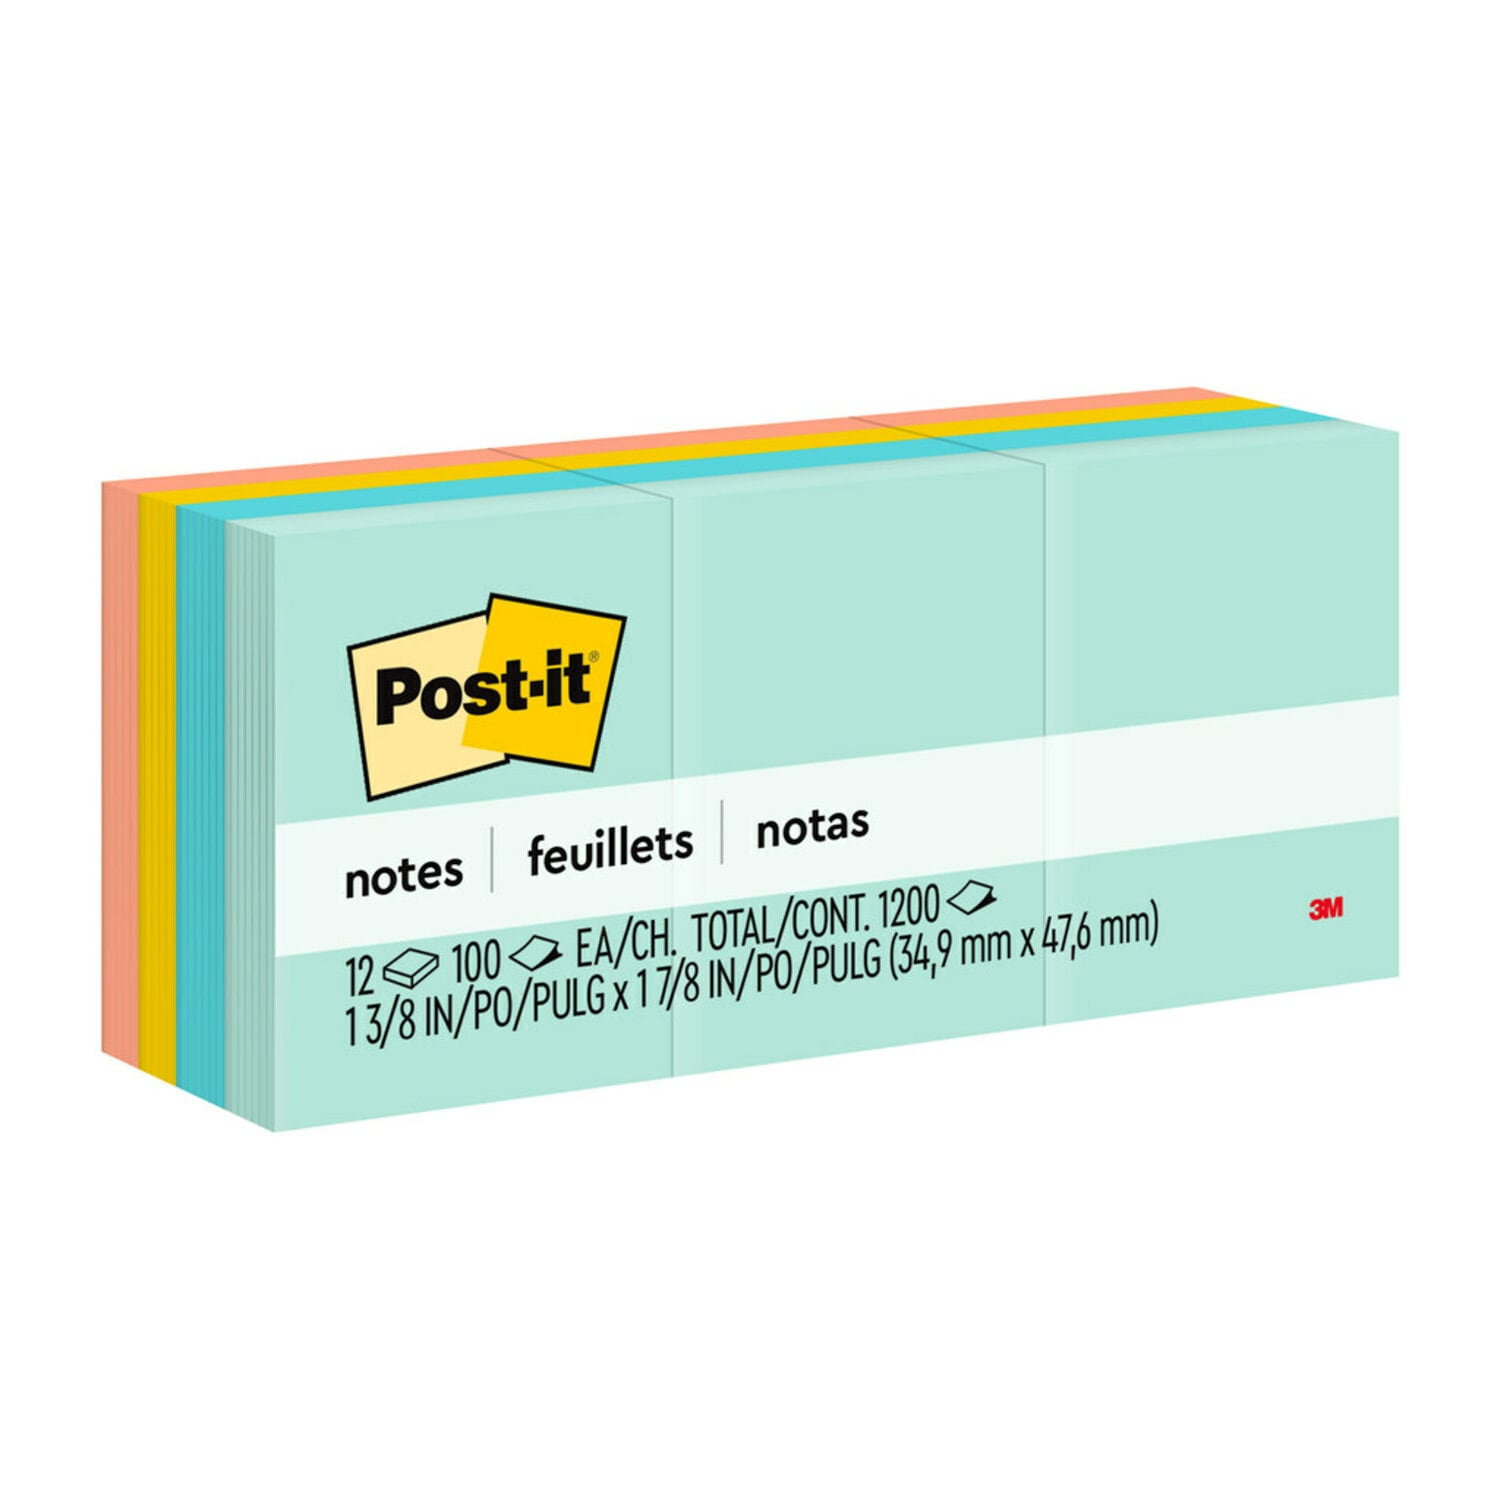 7100243768 - Post-it Notes 653-AST, 1-3/8 in x 1 7/8 in (34,9 mm x 47,6 mm) Marseille colors